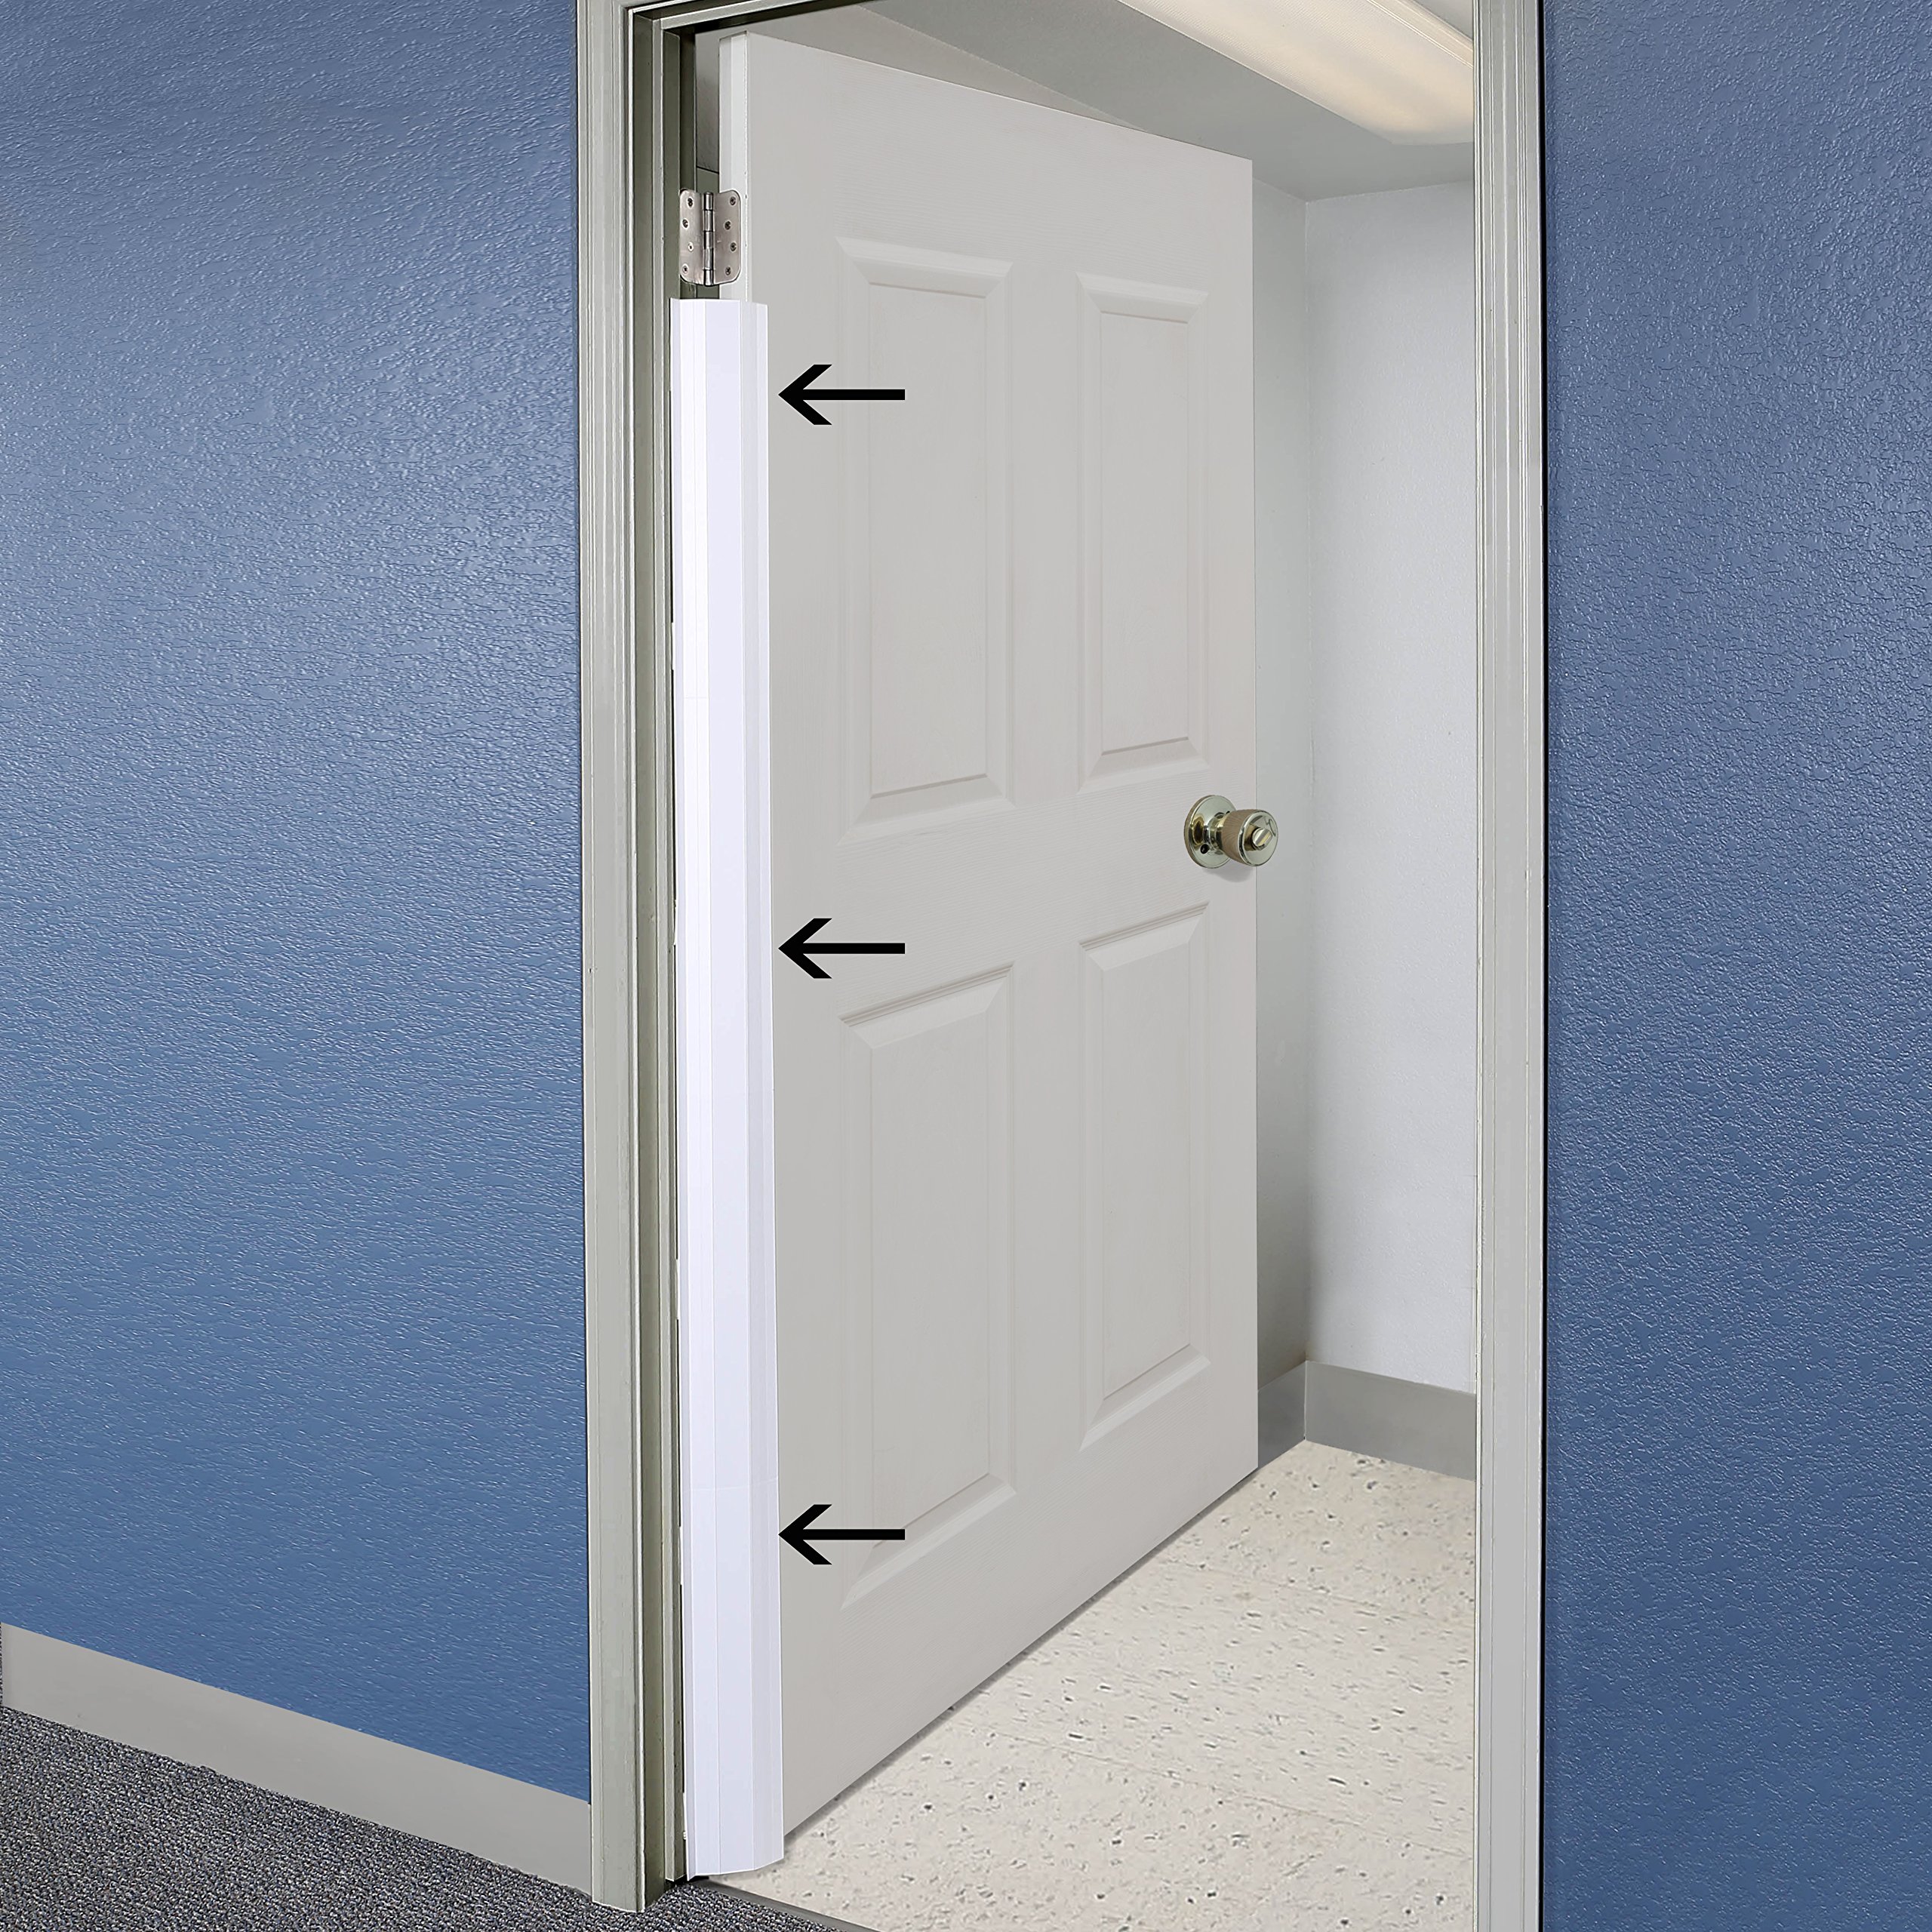 PinchNot Home Shield for 90 Degree Doors (Set) - Guard for Door Finger Child Safety. by Carlsbad Safety Products